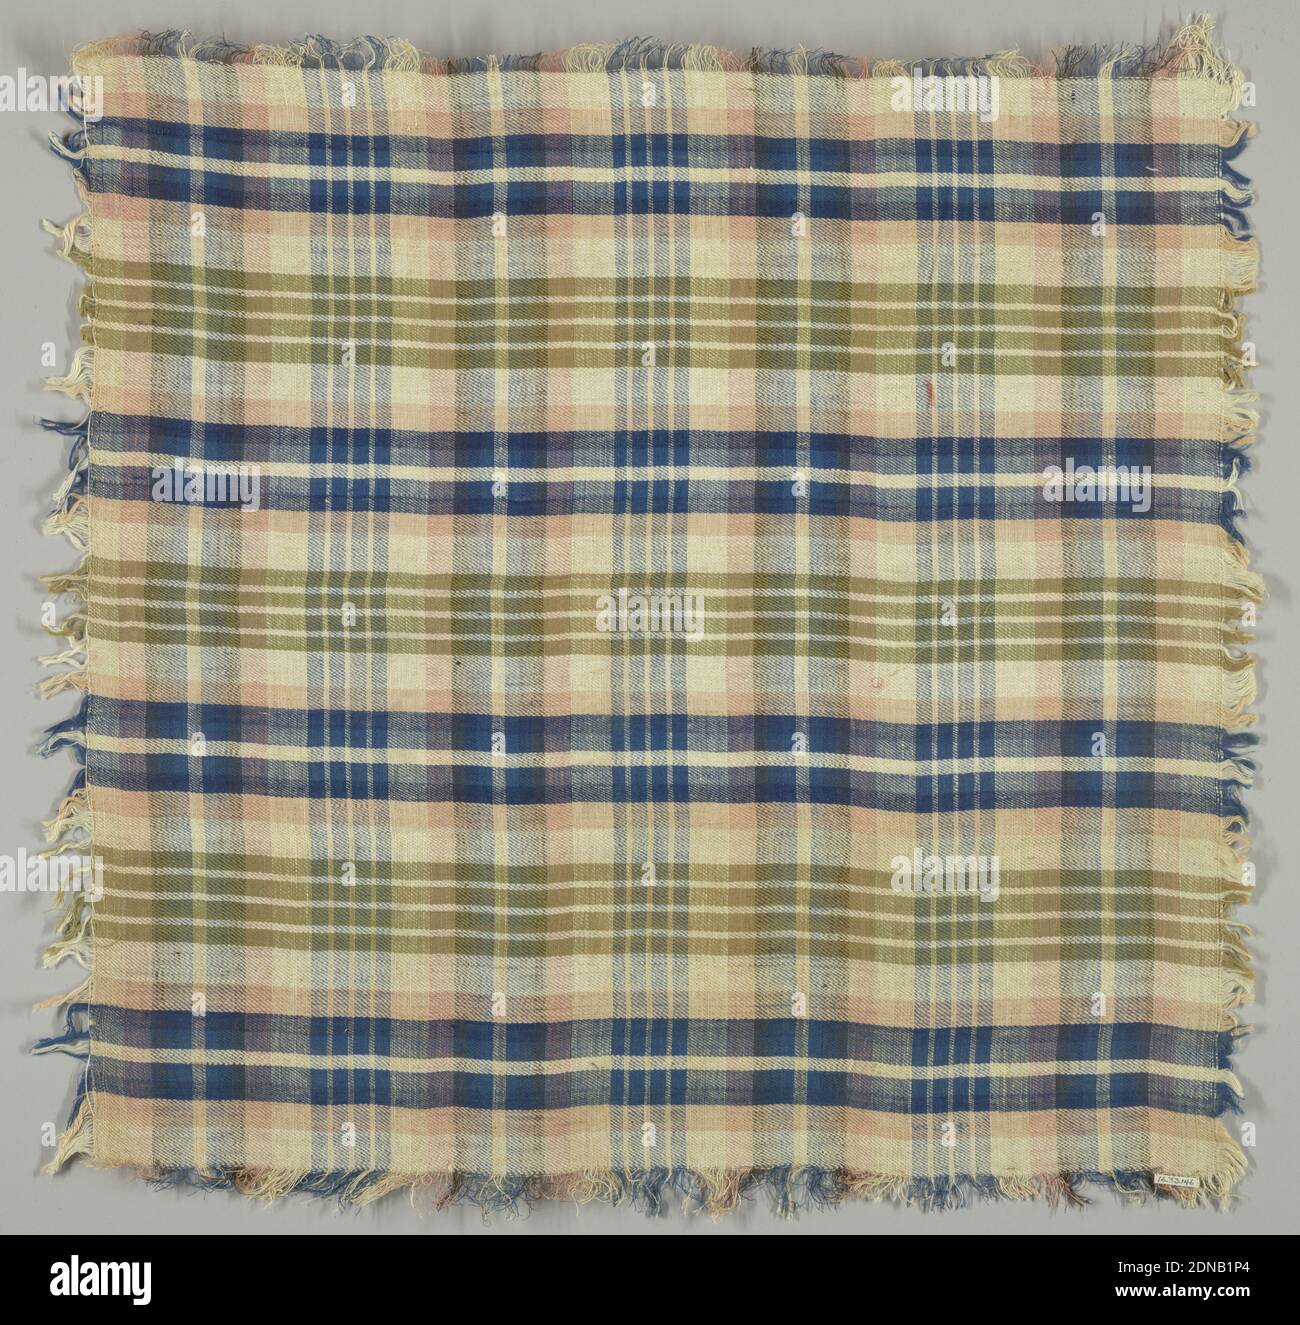 Handkerchief, Medium: cotton Technique: plain weave, Handkerchief in a coarsely woven plaid of off-white, navy blue, olive green, and pink. Fringed on all four sides., USA, 19th century, woven textiles, Handkerchief Stock Photo